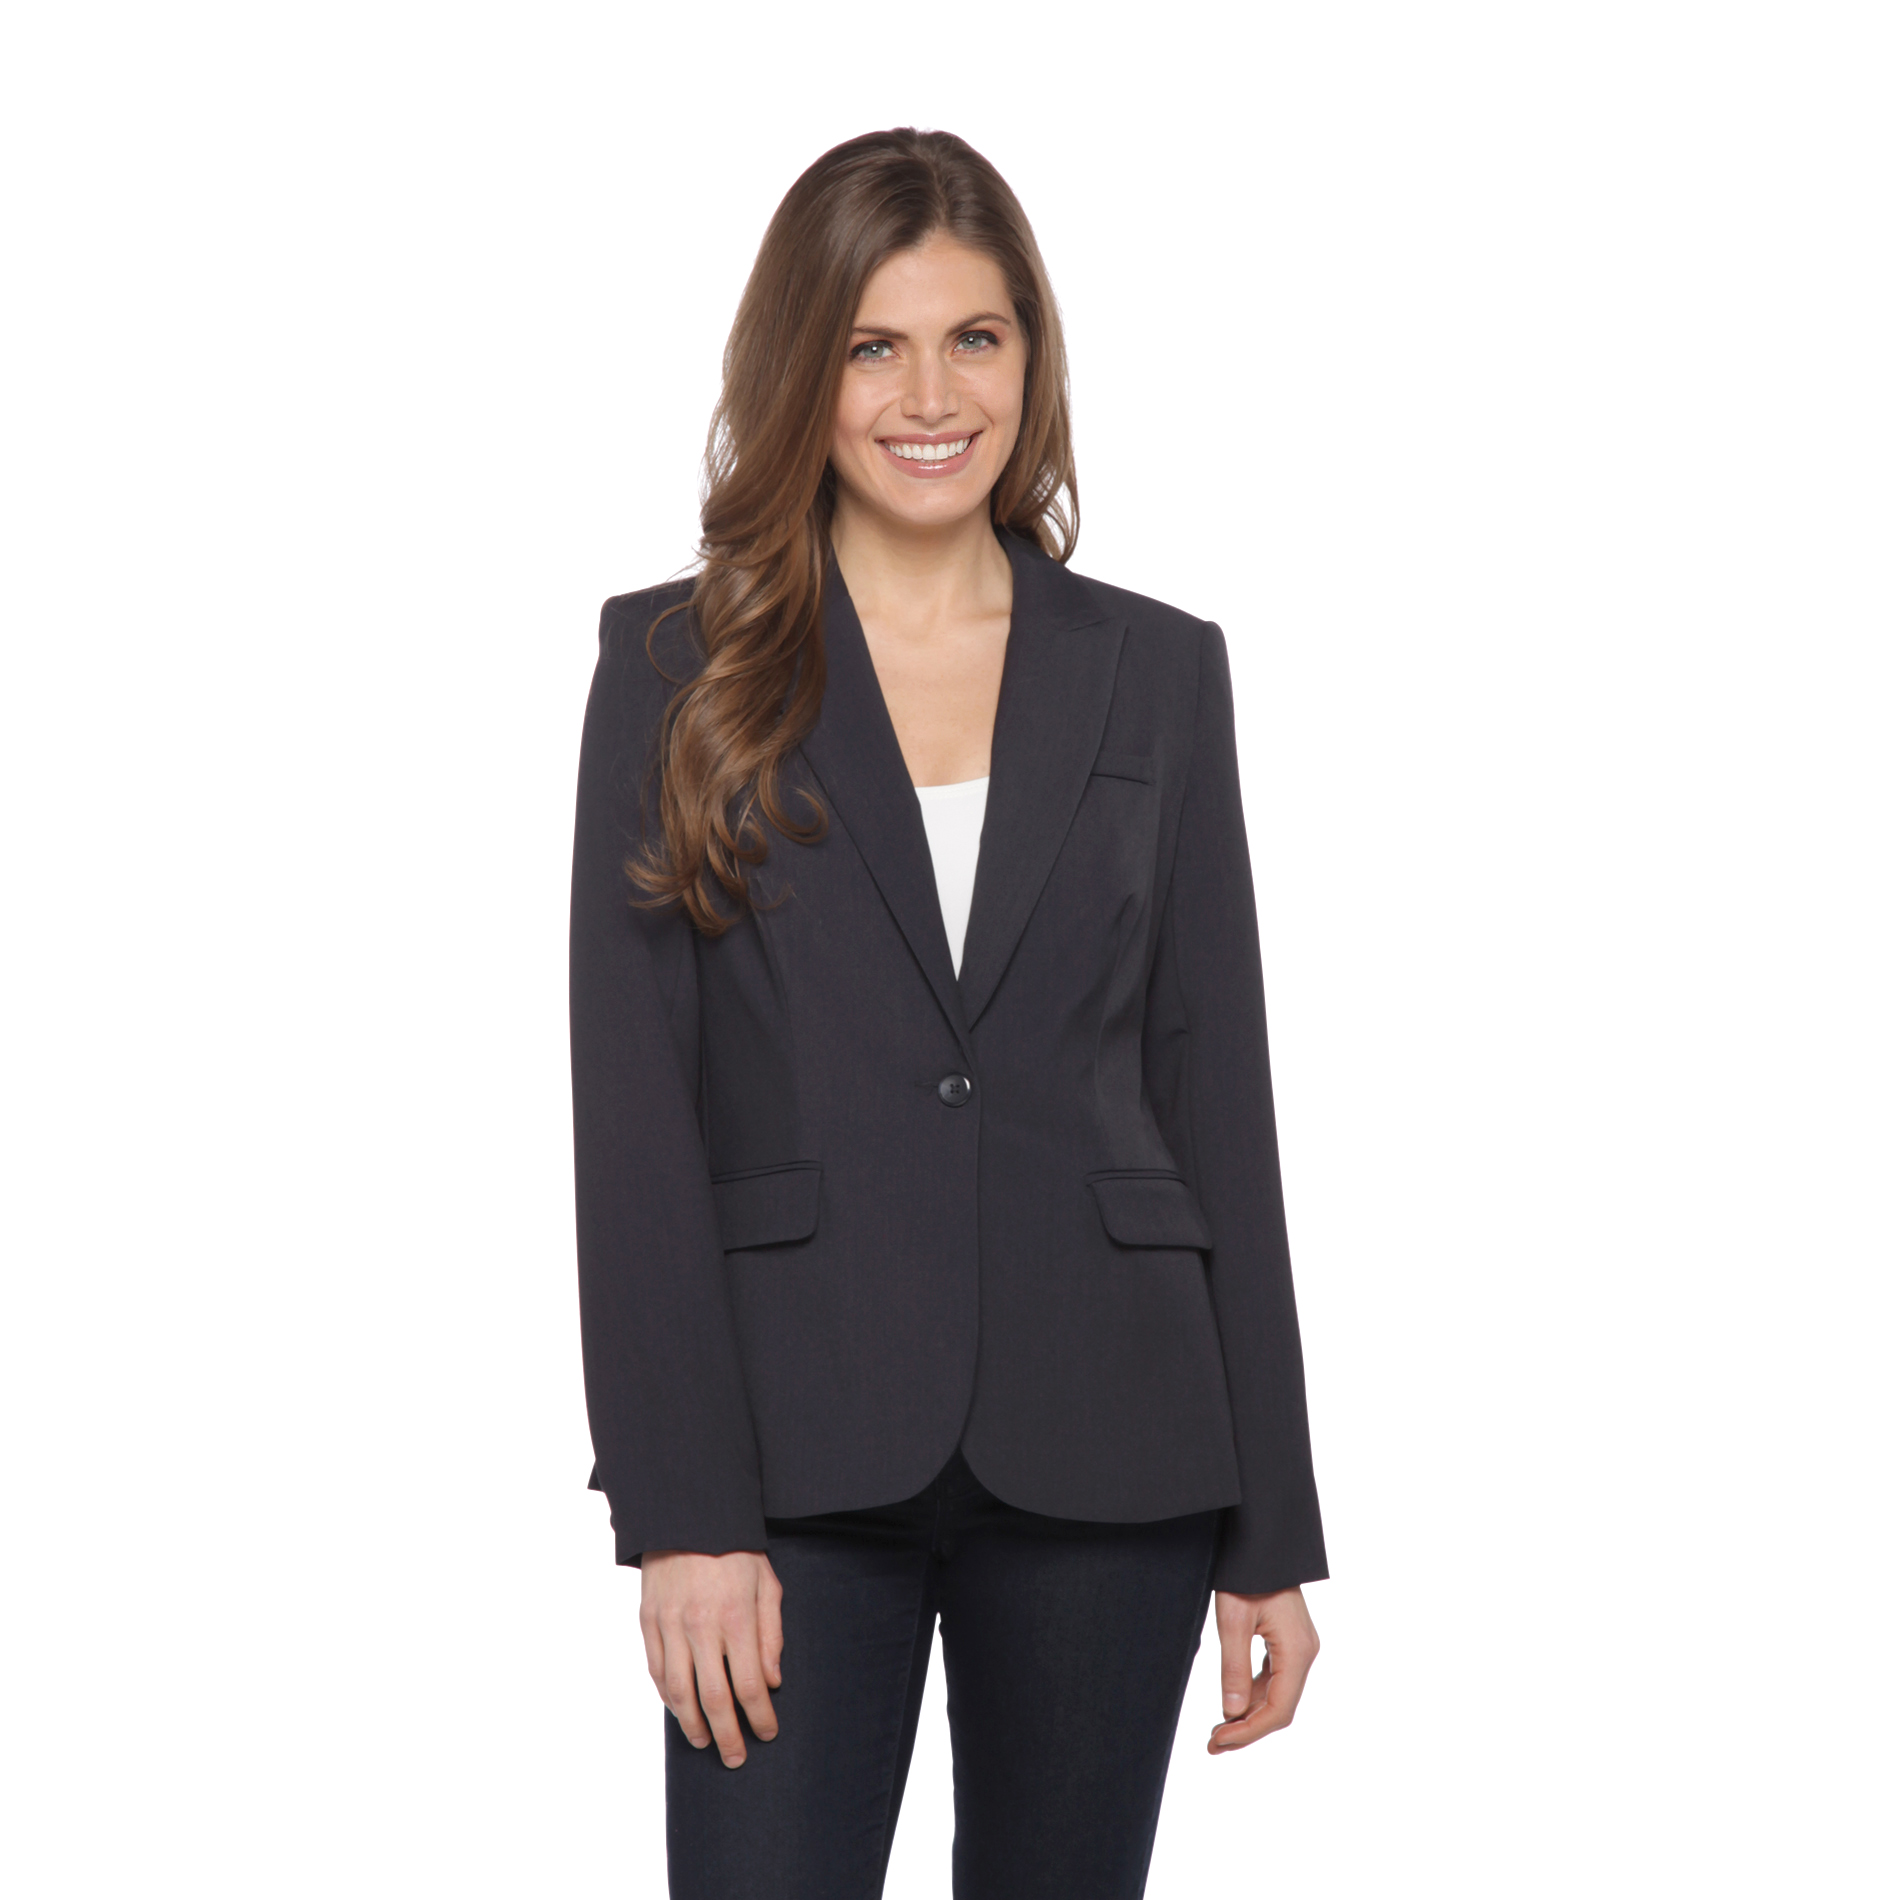 Metaphor Women's Single-Breasted Suiting Jacket